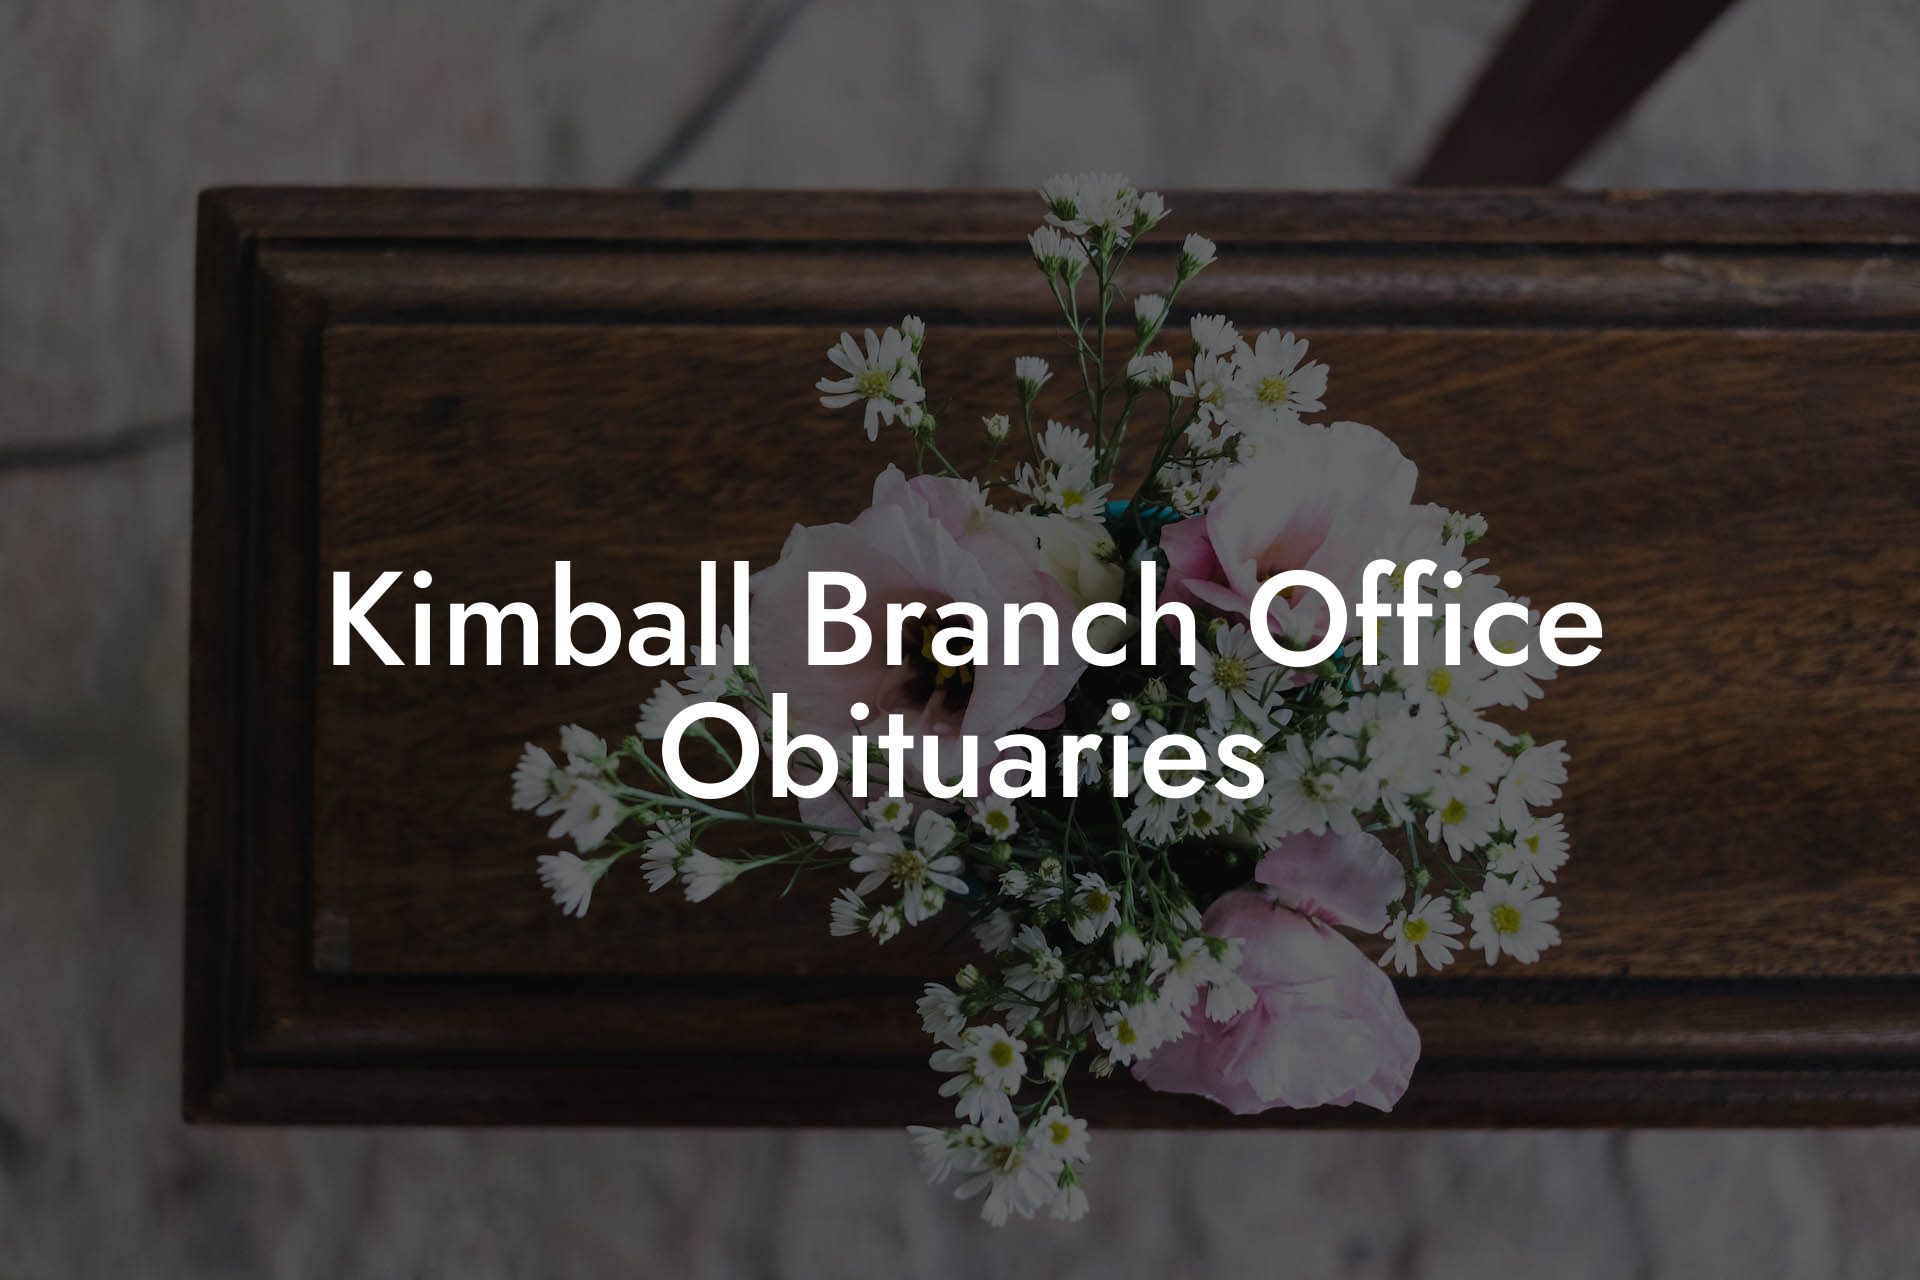 Kimball Branch Office Obituaries